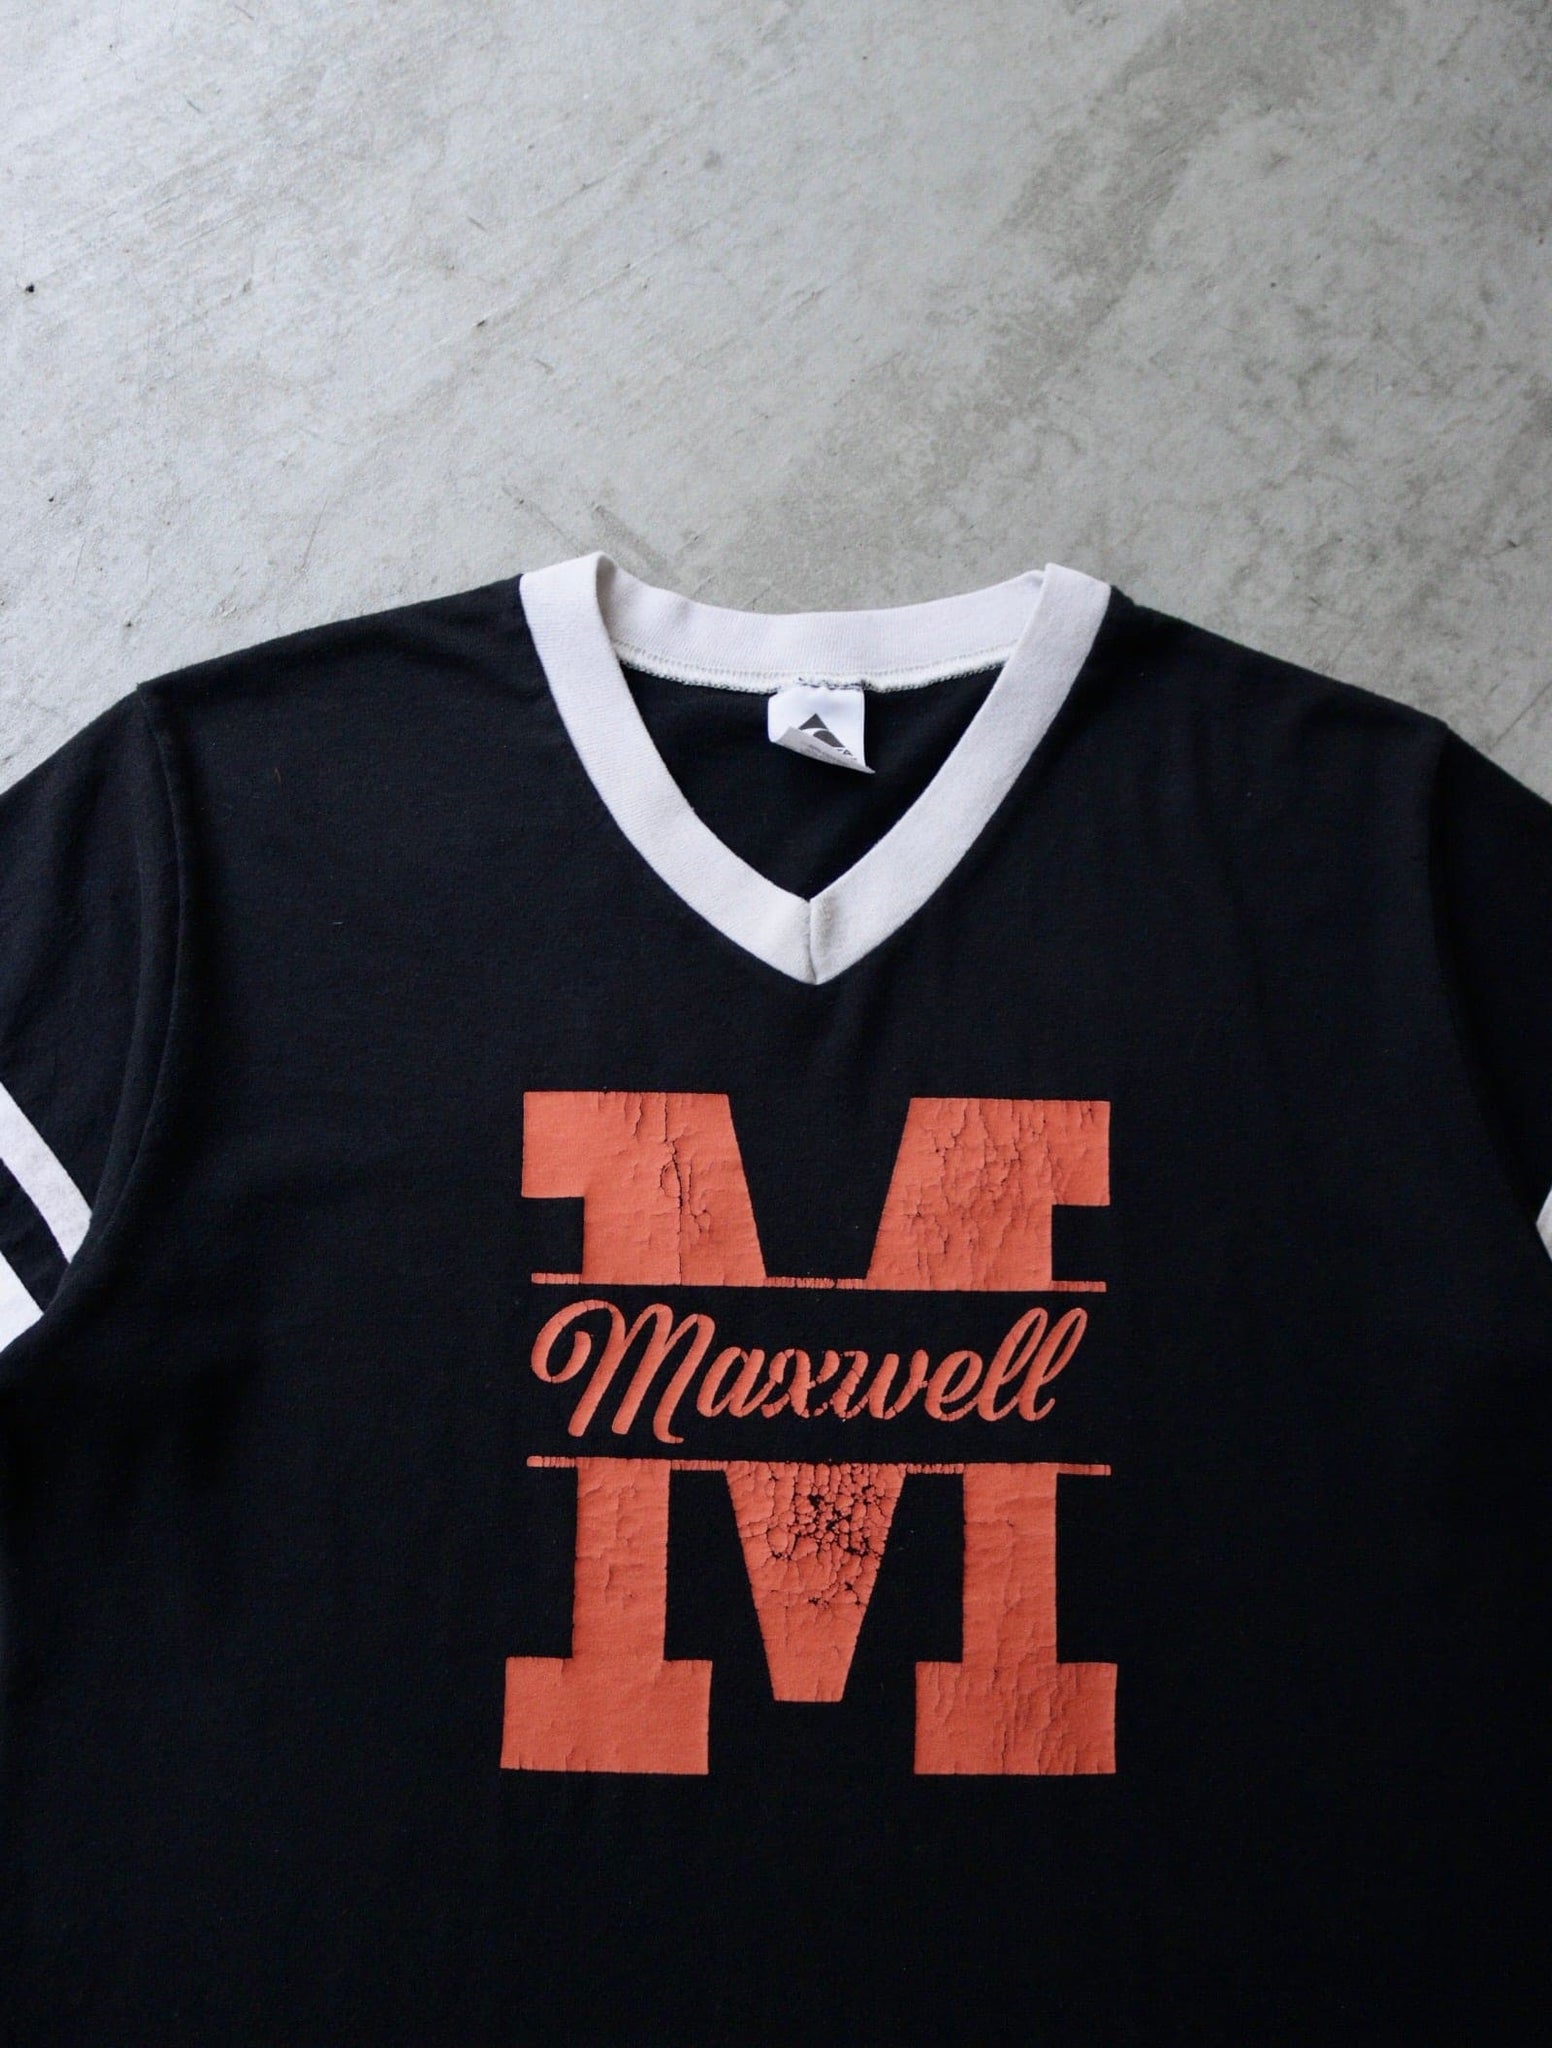 1980S MAXWELL JERSEY